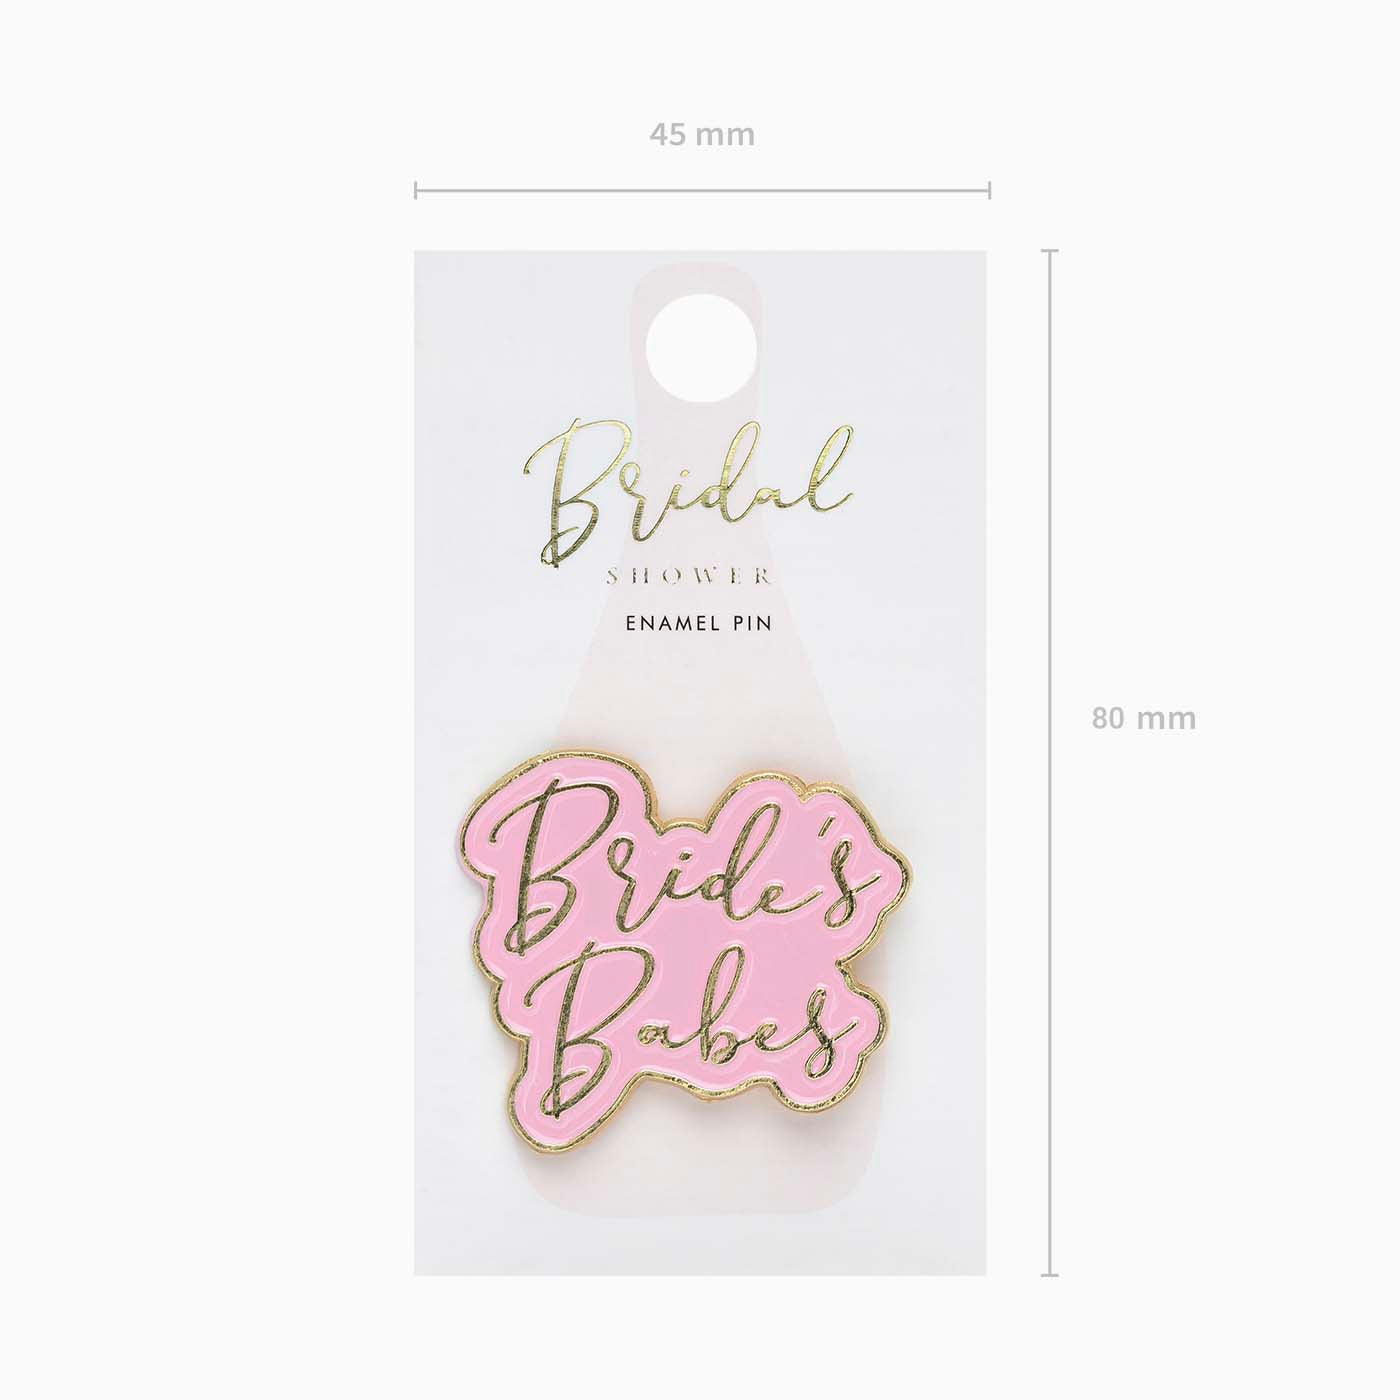 Brooche "Babes"